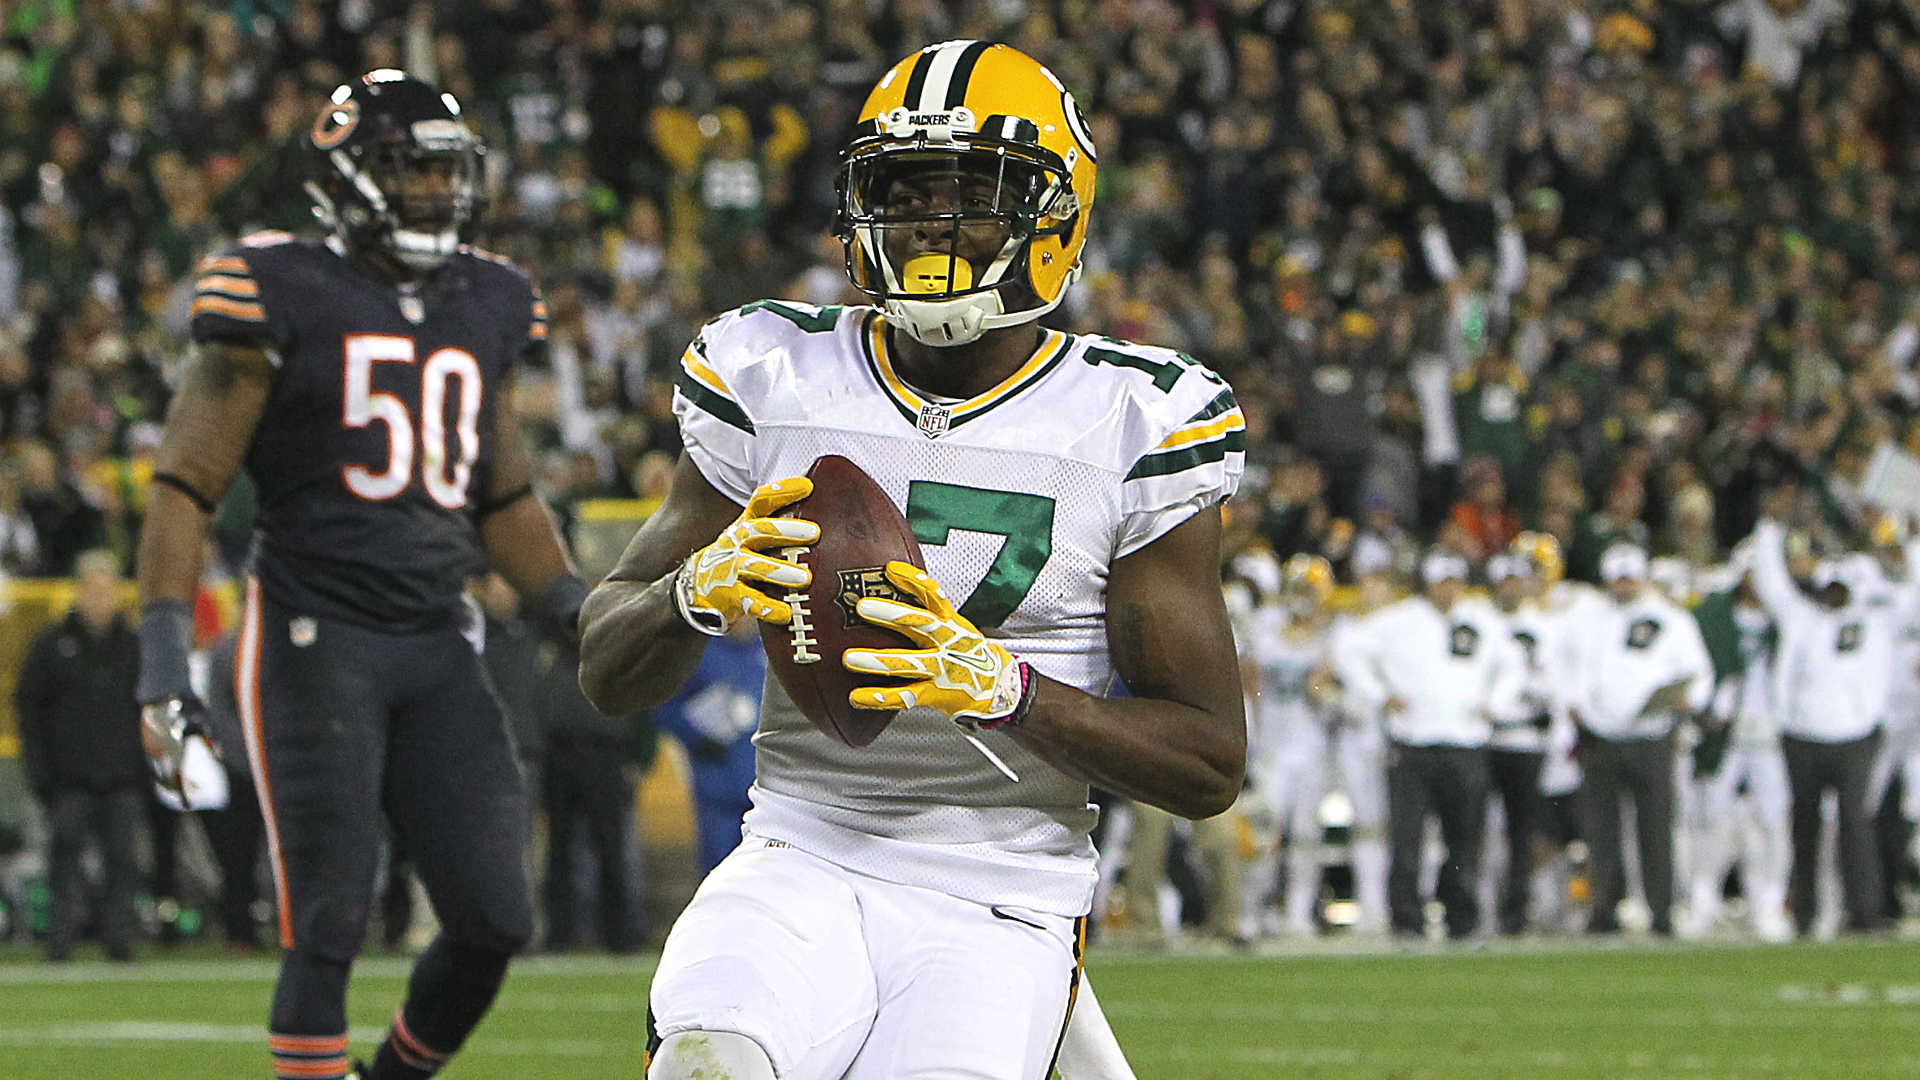 Baby Jesus' Davante Adams steps up for Packers on record night